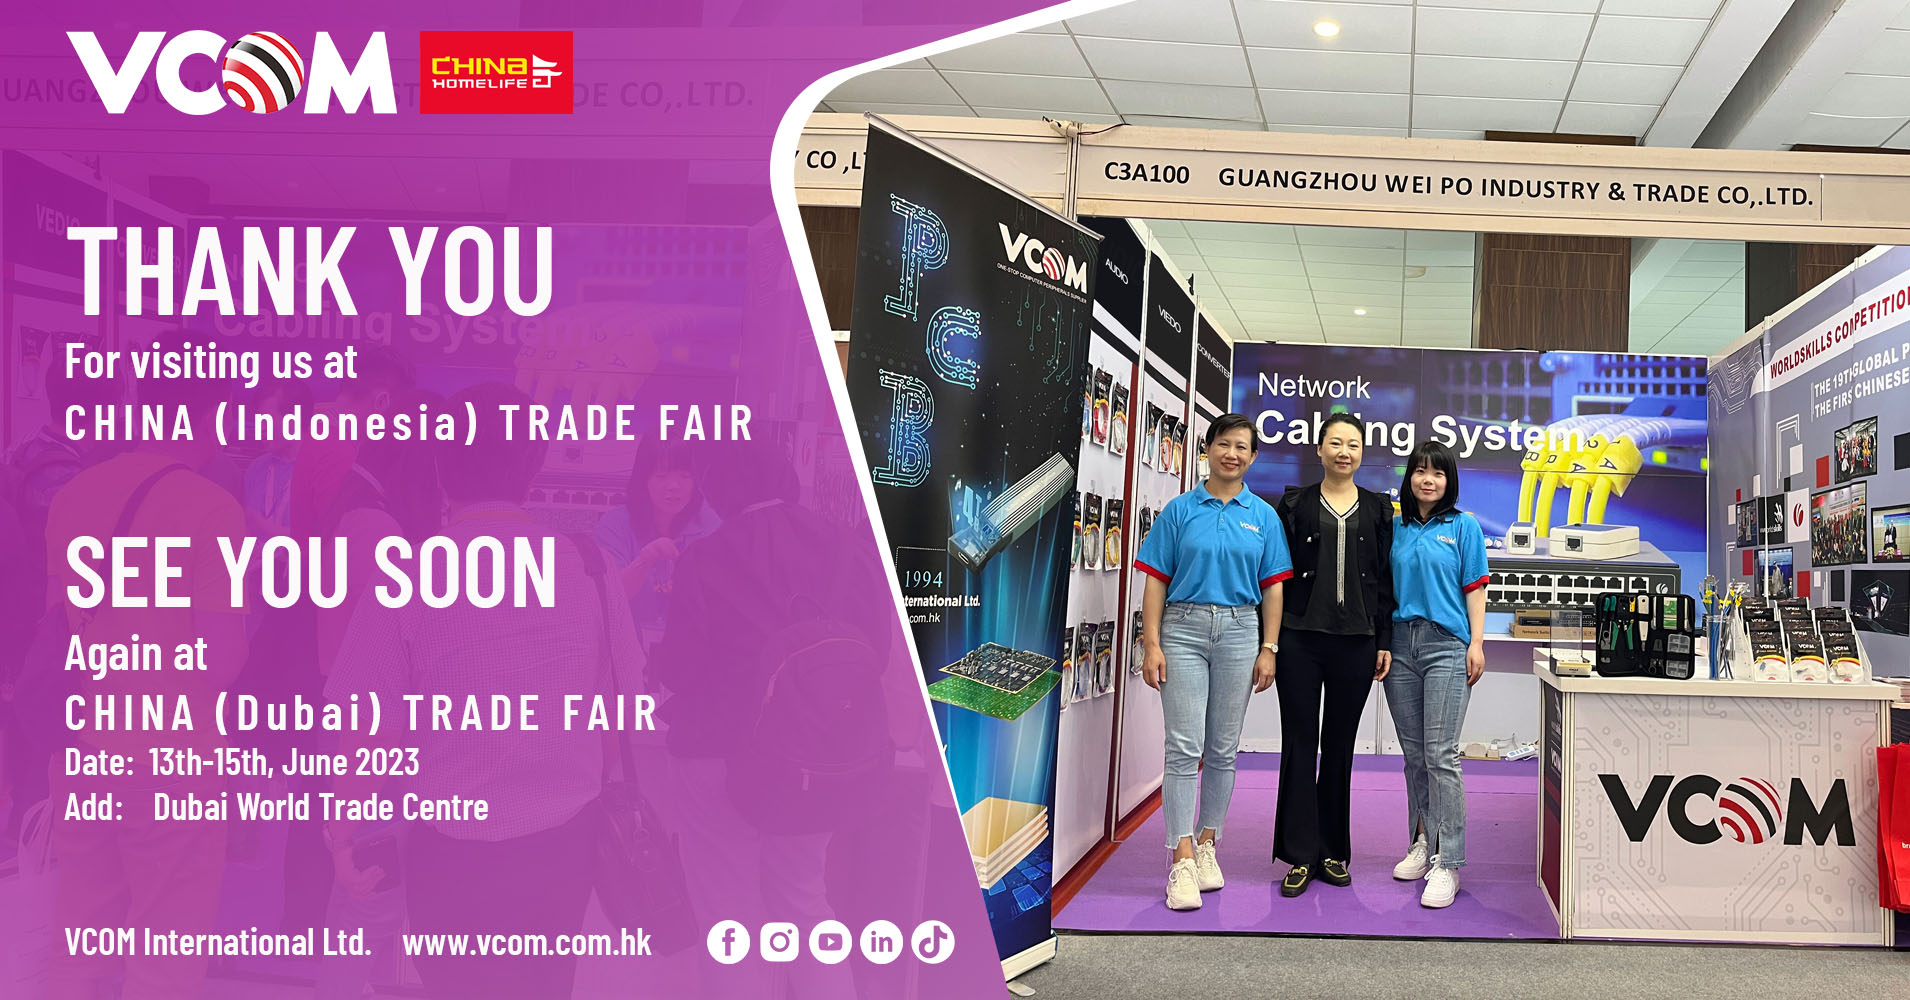 THANK YOU FOR VISITING OUR BOOTH AT CHINA (Indonesia) TRADE FAIR